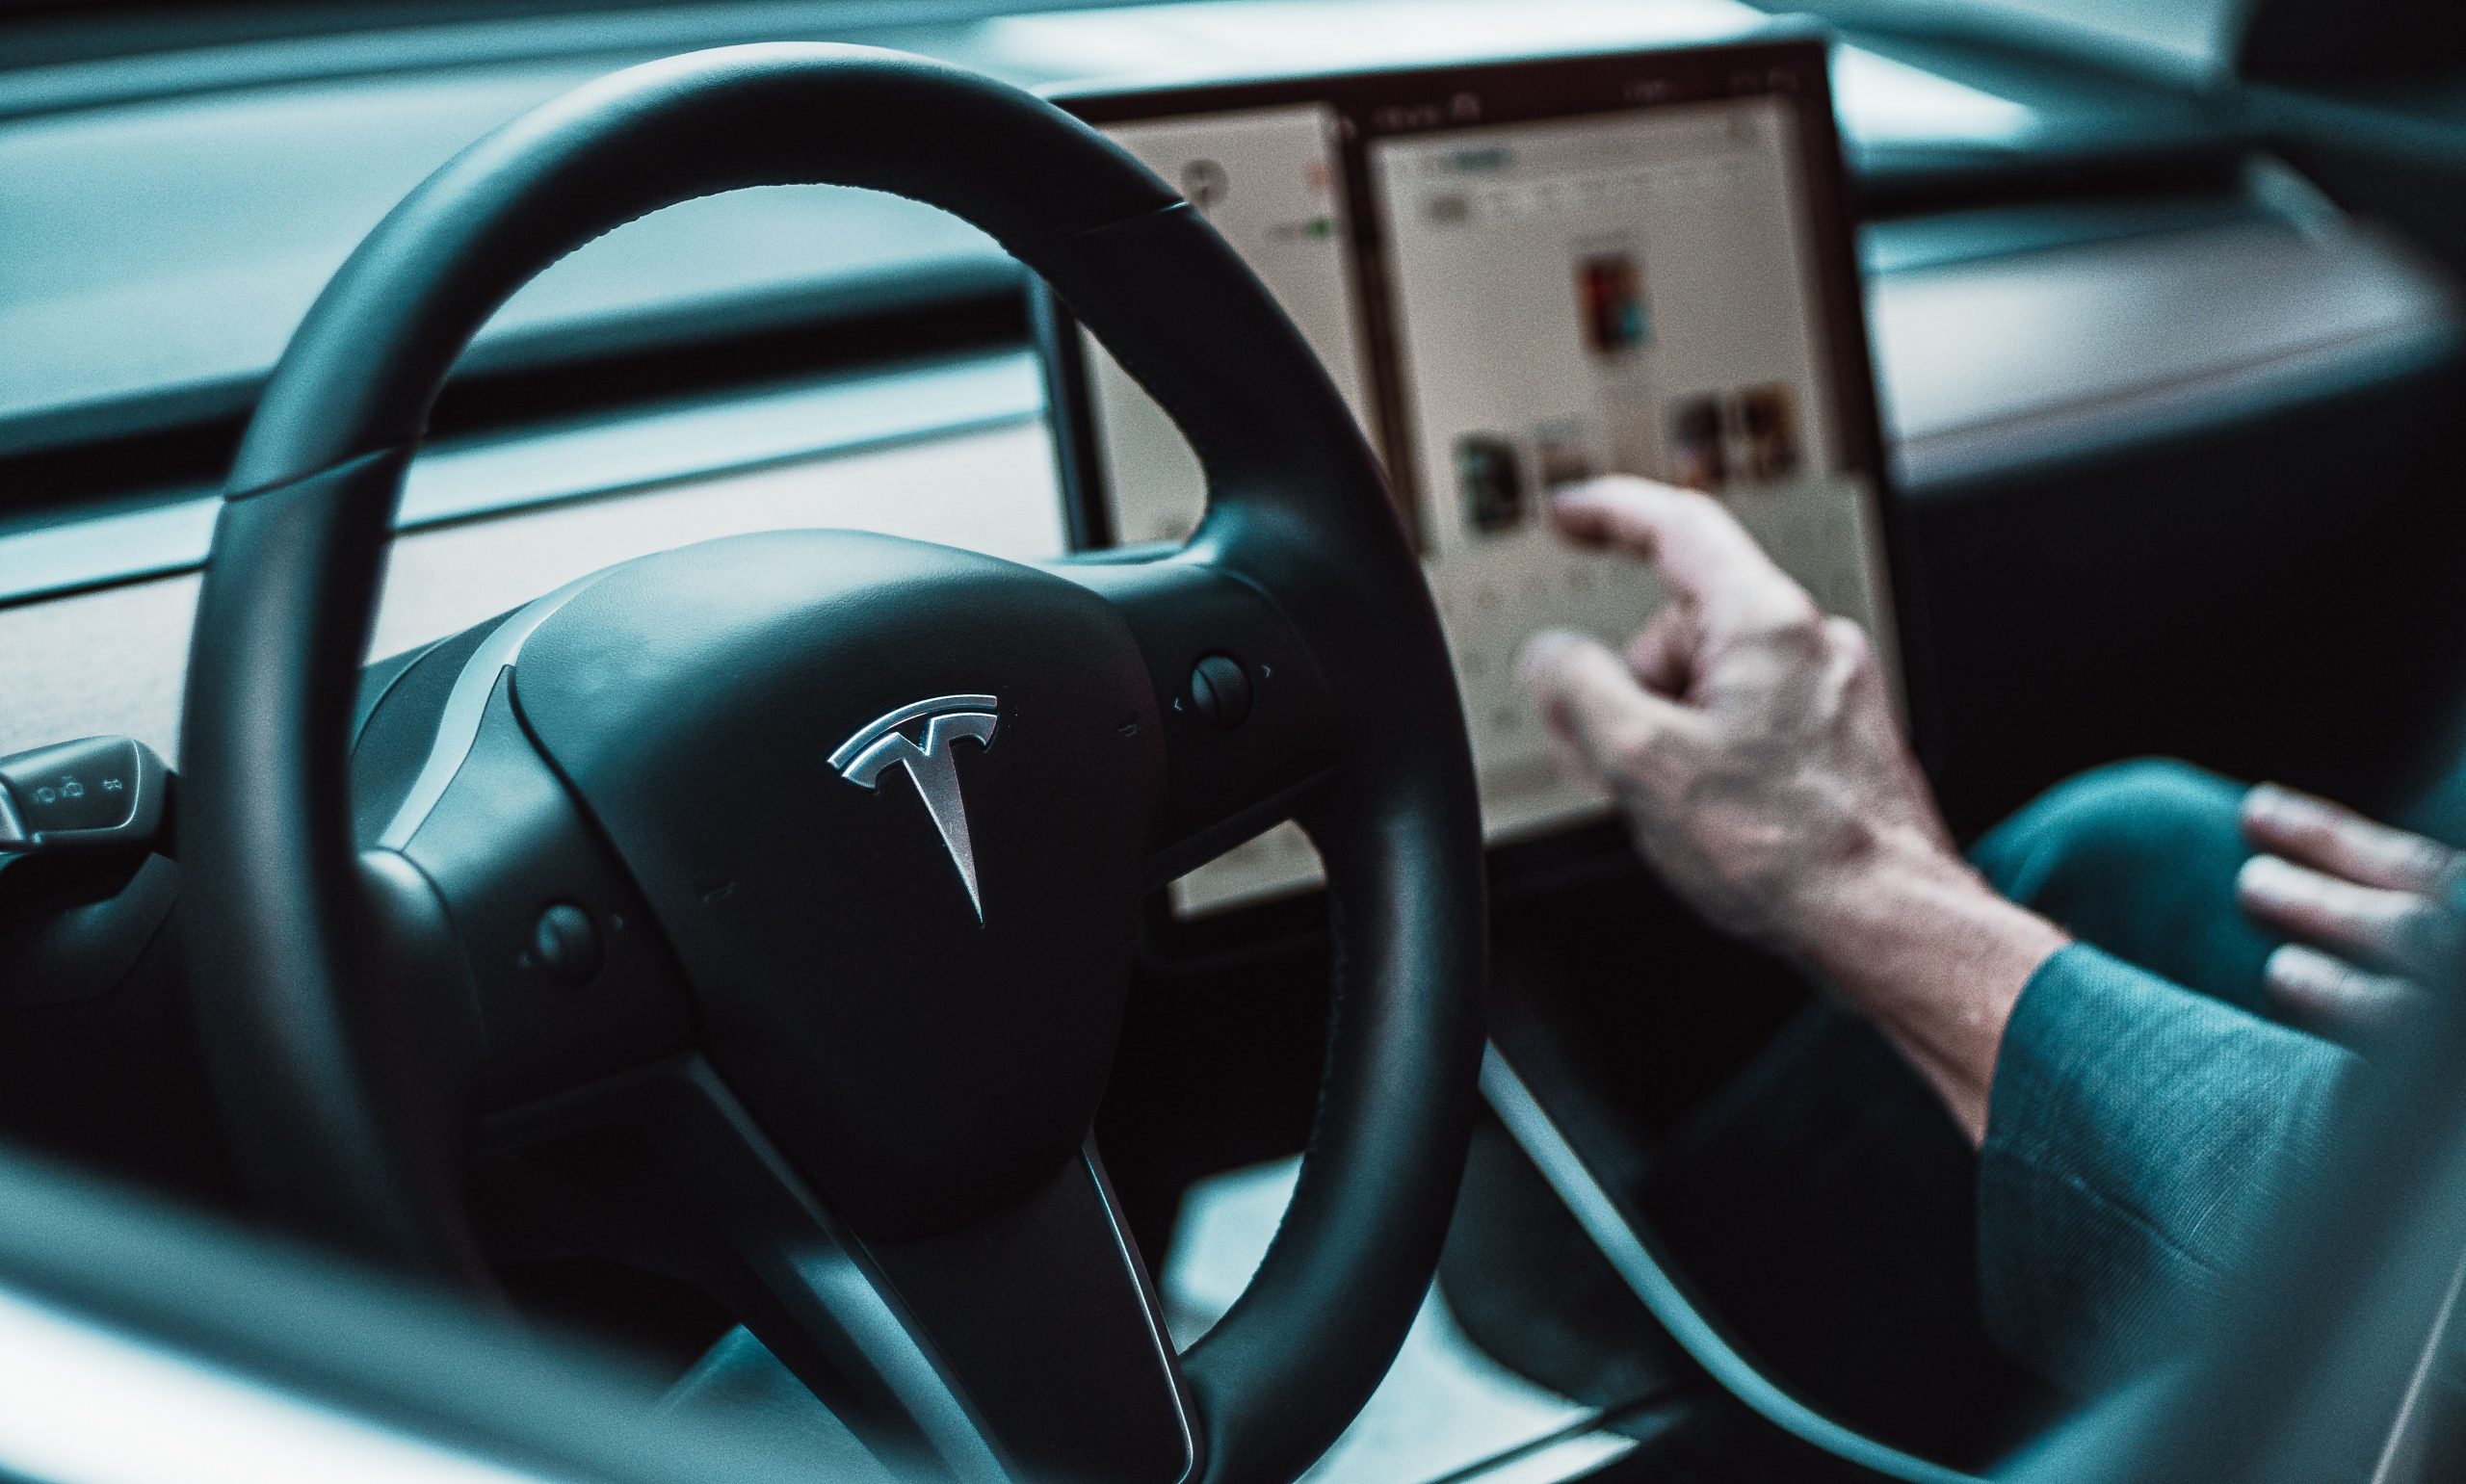 Watch: Tesla car’s charging port open with ‘Open butthole’ voice command